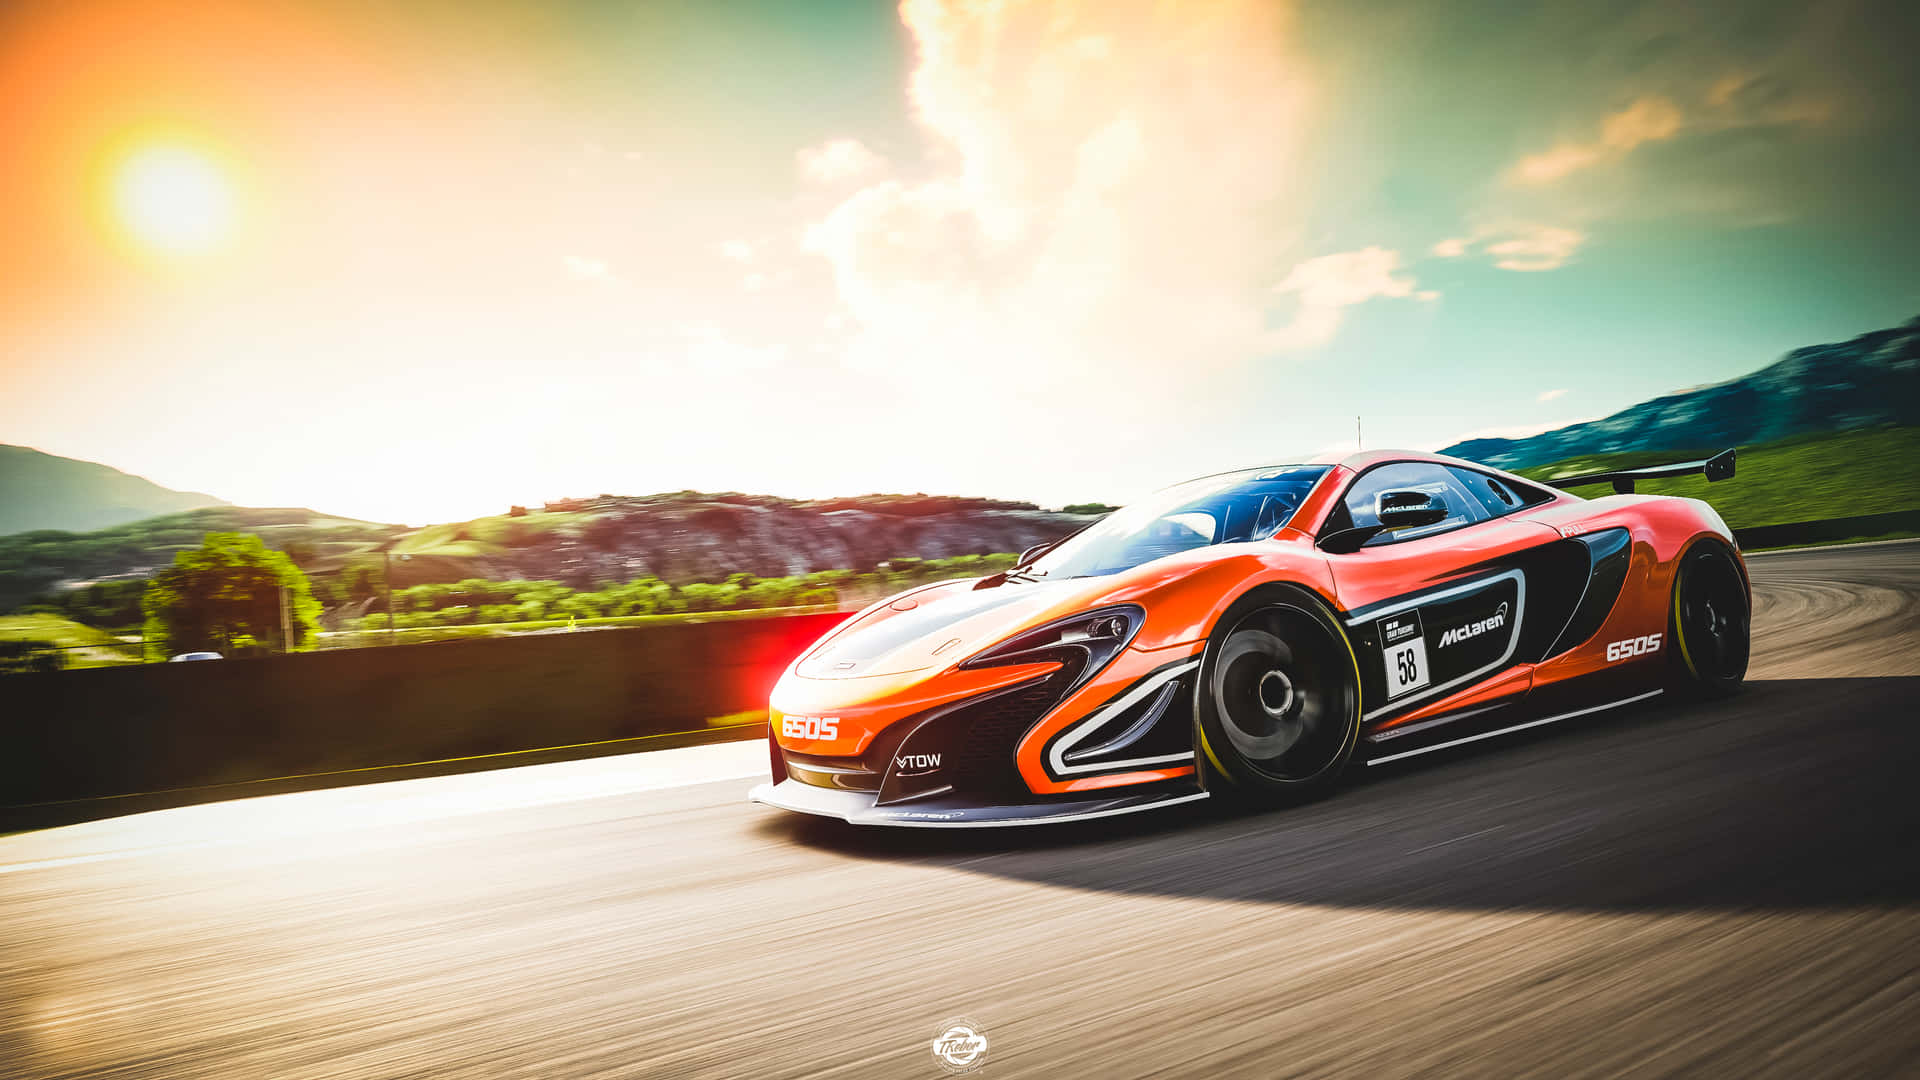 Cruise in Style with this Cool McLaren Wallpaper